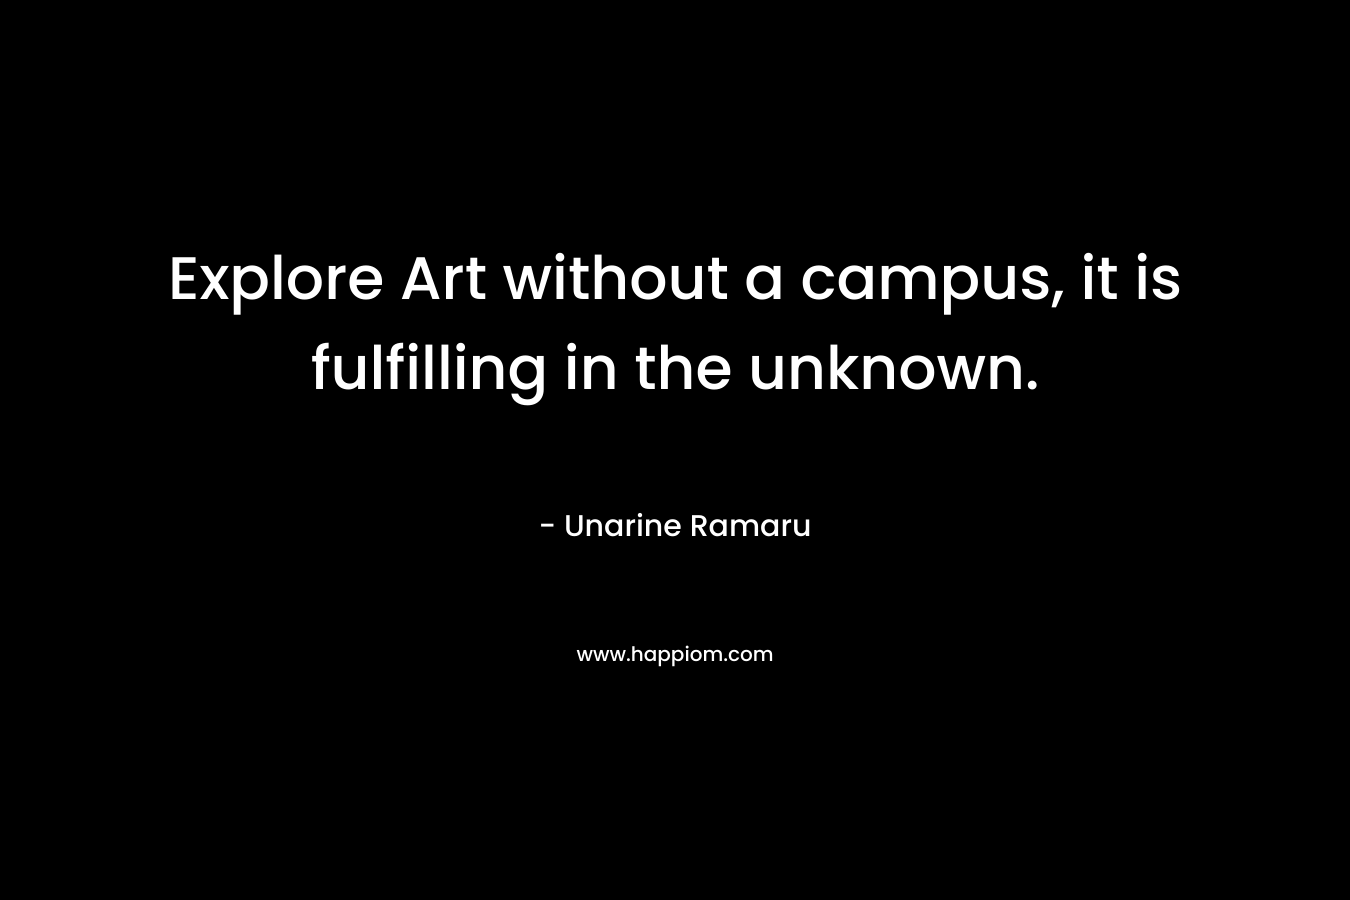 Explore Art without a campus, it is fulfilling in the unknown. – Unarine Ramaru